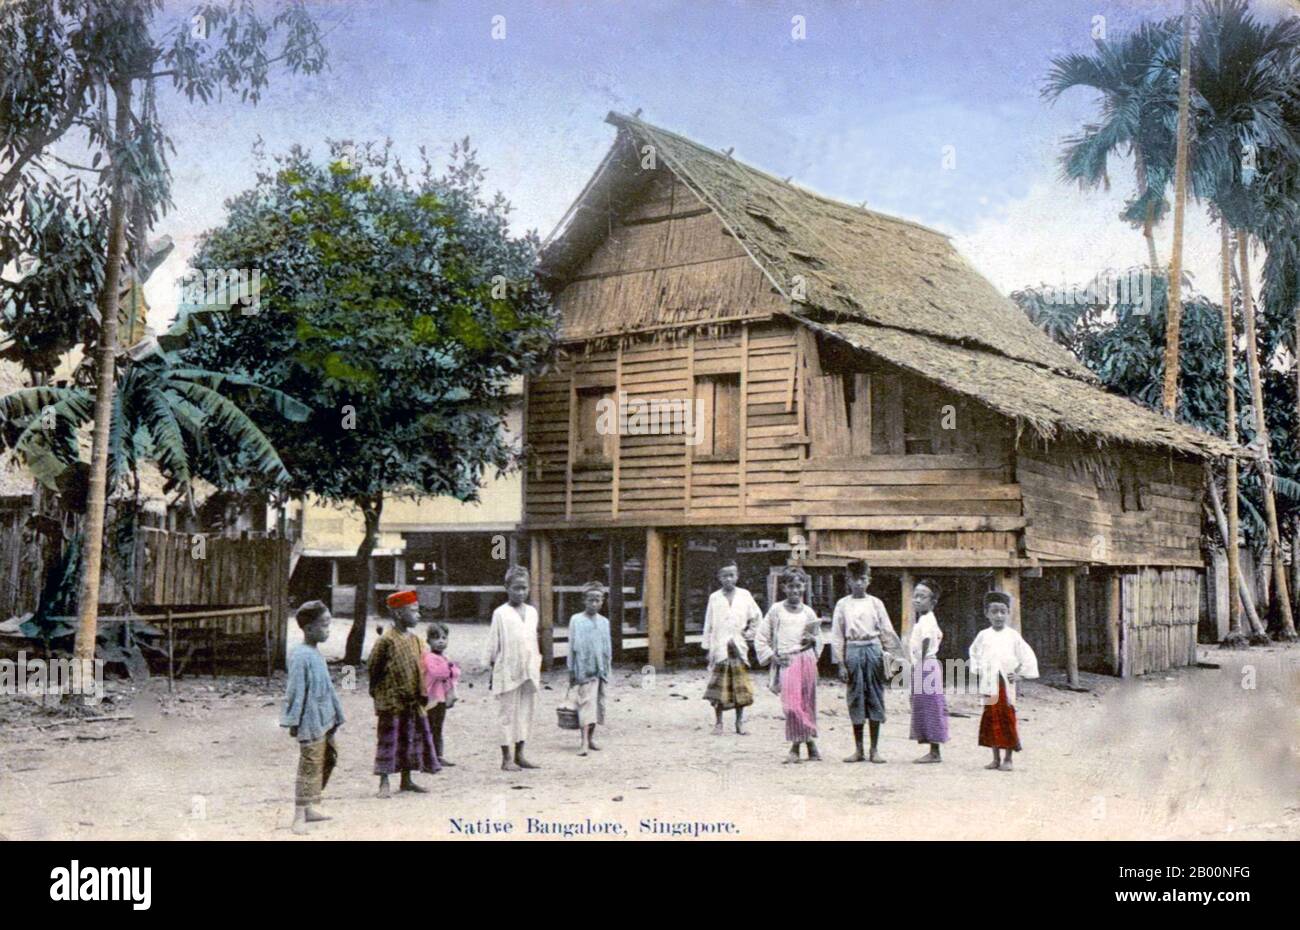 Singapore: Malay children and stilt house at 'Bangalore Village', postcard from Singapore, 1919.  Singapore hosted a trading post of the East India Company in 1819 with permission from the Sultanate of Johor. The British obtained sovereignty over the island in 1824 and Singapore became one of the British Straits Settlements in 1826. Occupied by the Japanese in World War II, Singapore declared independence, uniting with other former British territories to form Malaysia in 1963, although it was separated from Malaysia two years later and became one of the successful Four Asian Tigers. Stock Photo